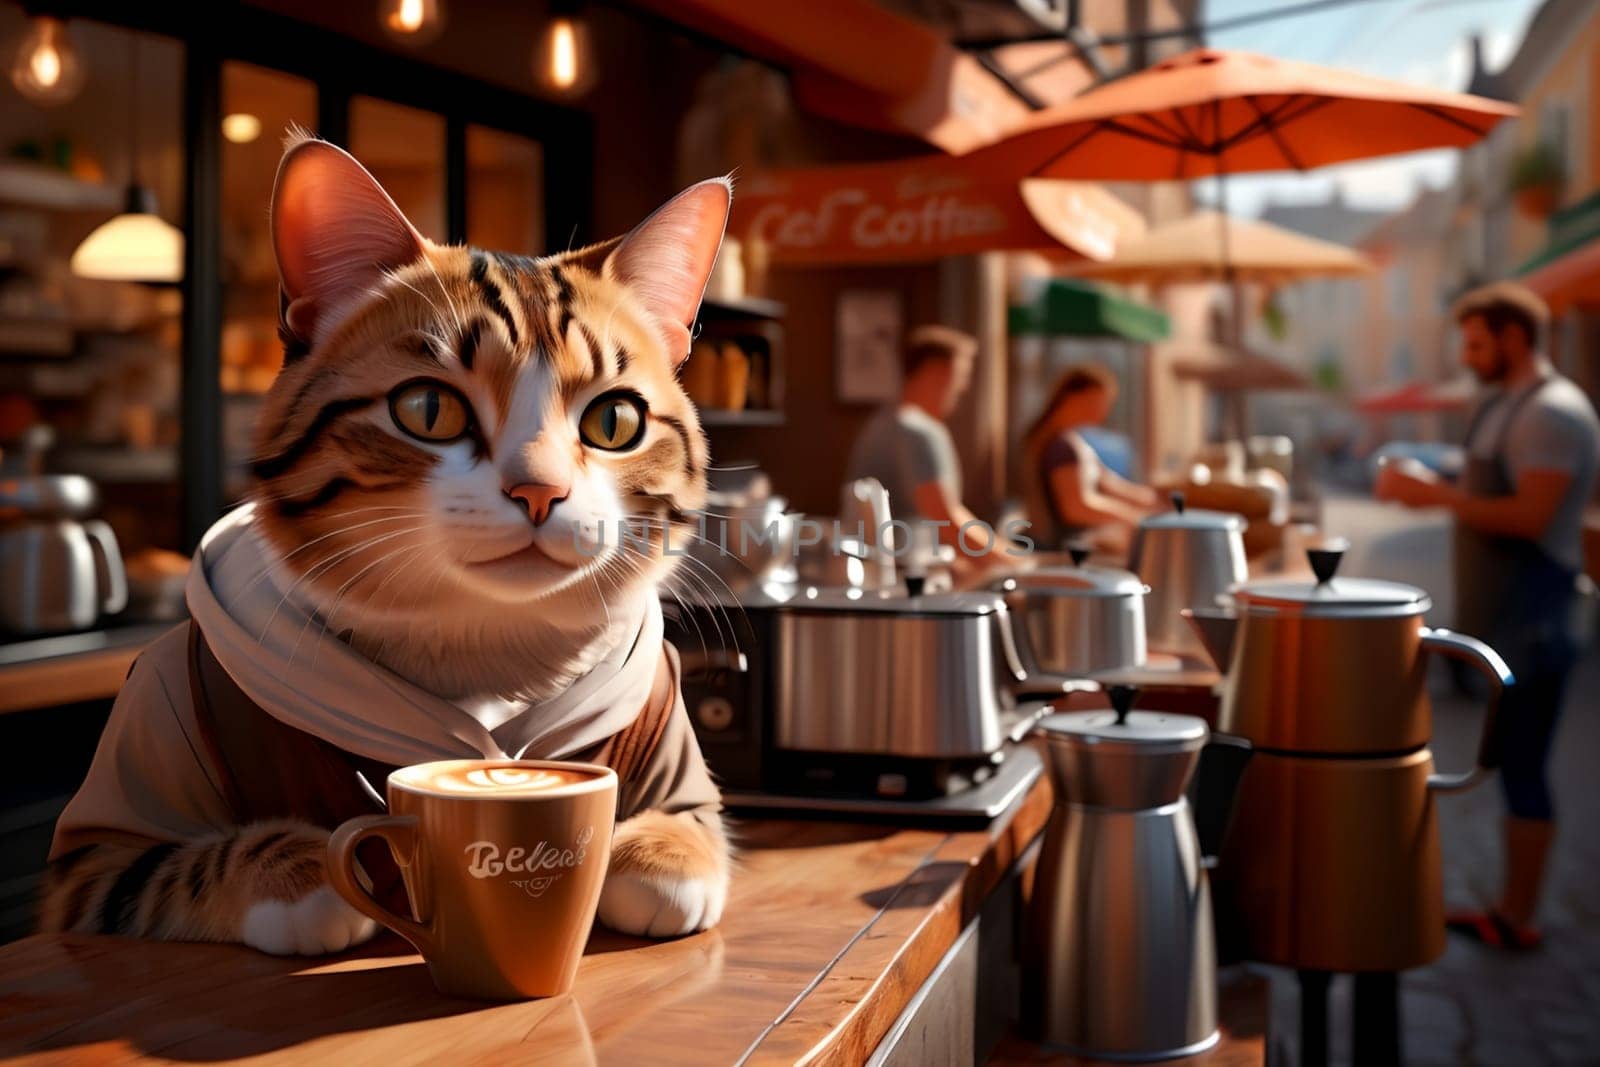 cat barista makes coffee near the coffee machine in a cafe .